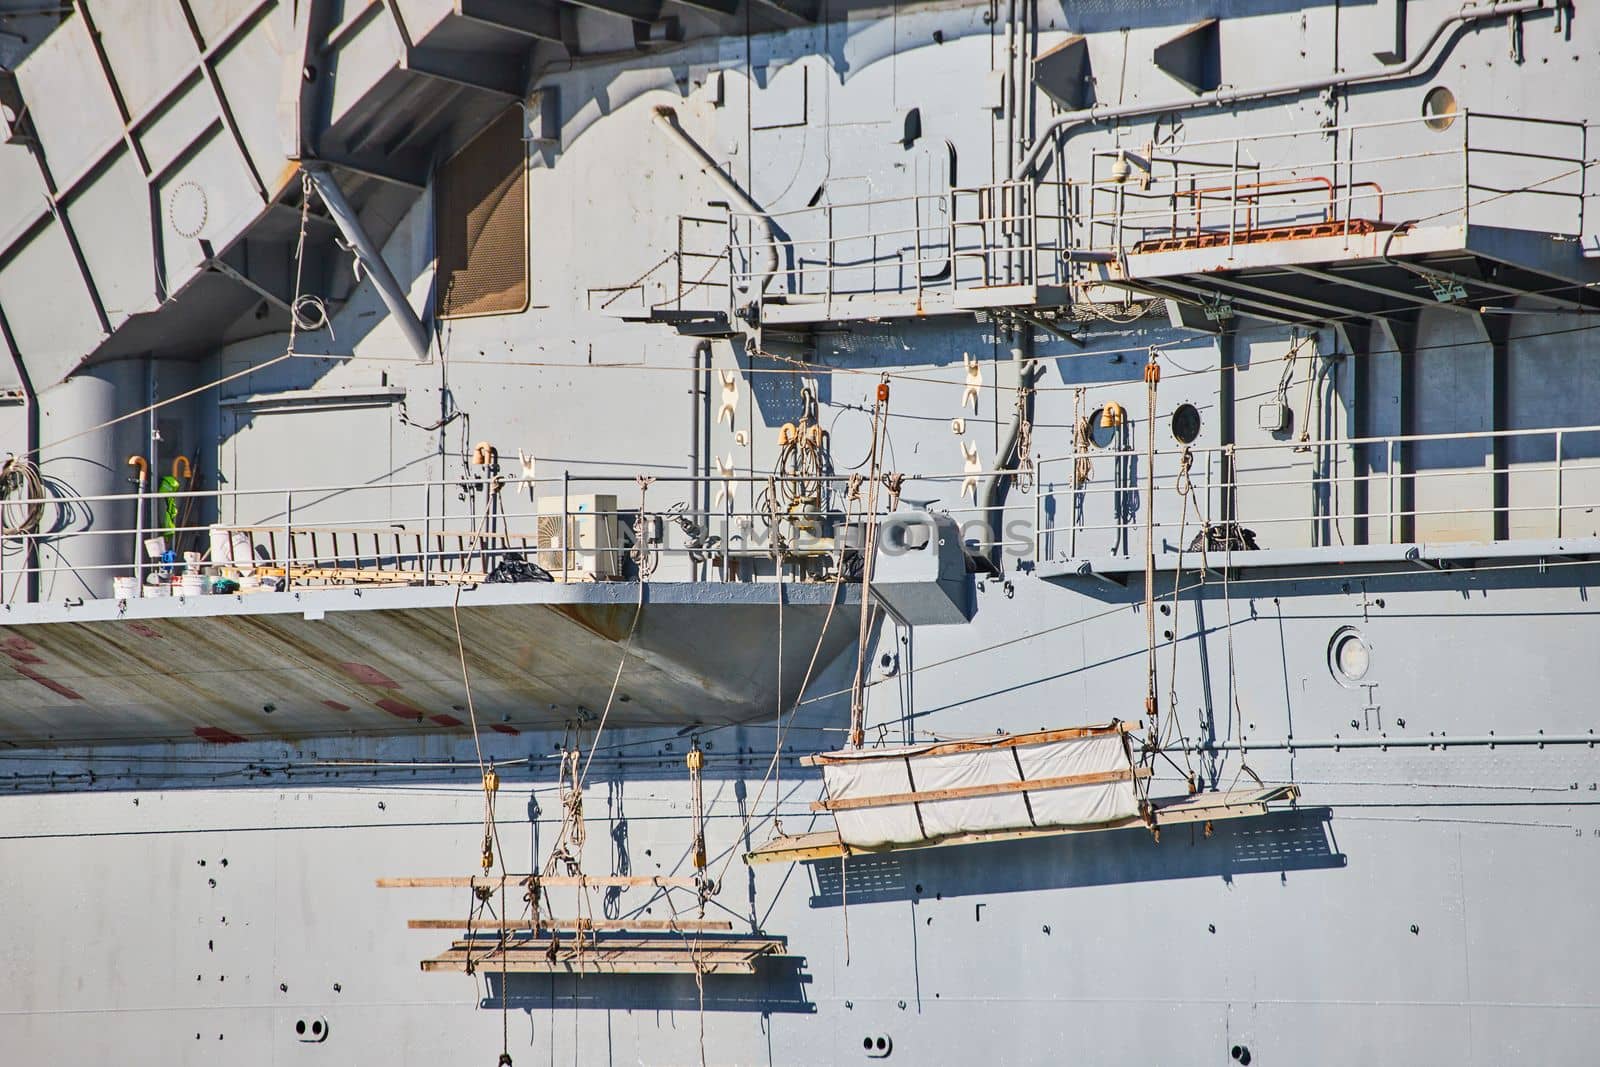 Side detail of platforms on aircraft carrier American military ship for navy by njproductions